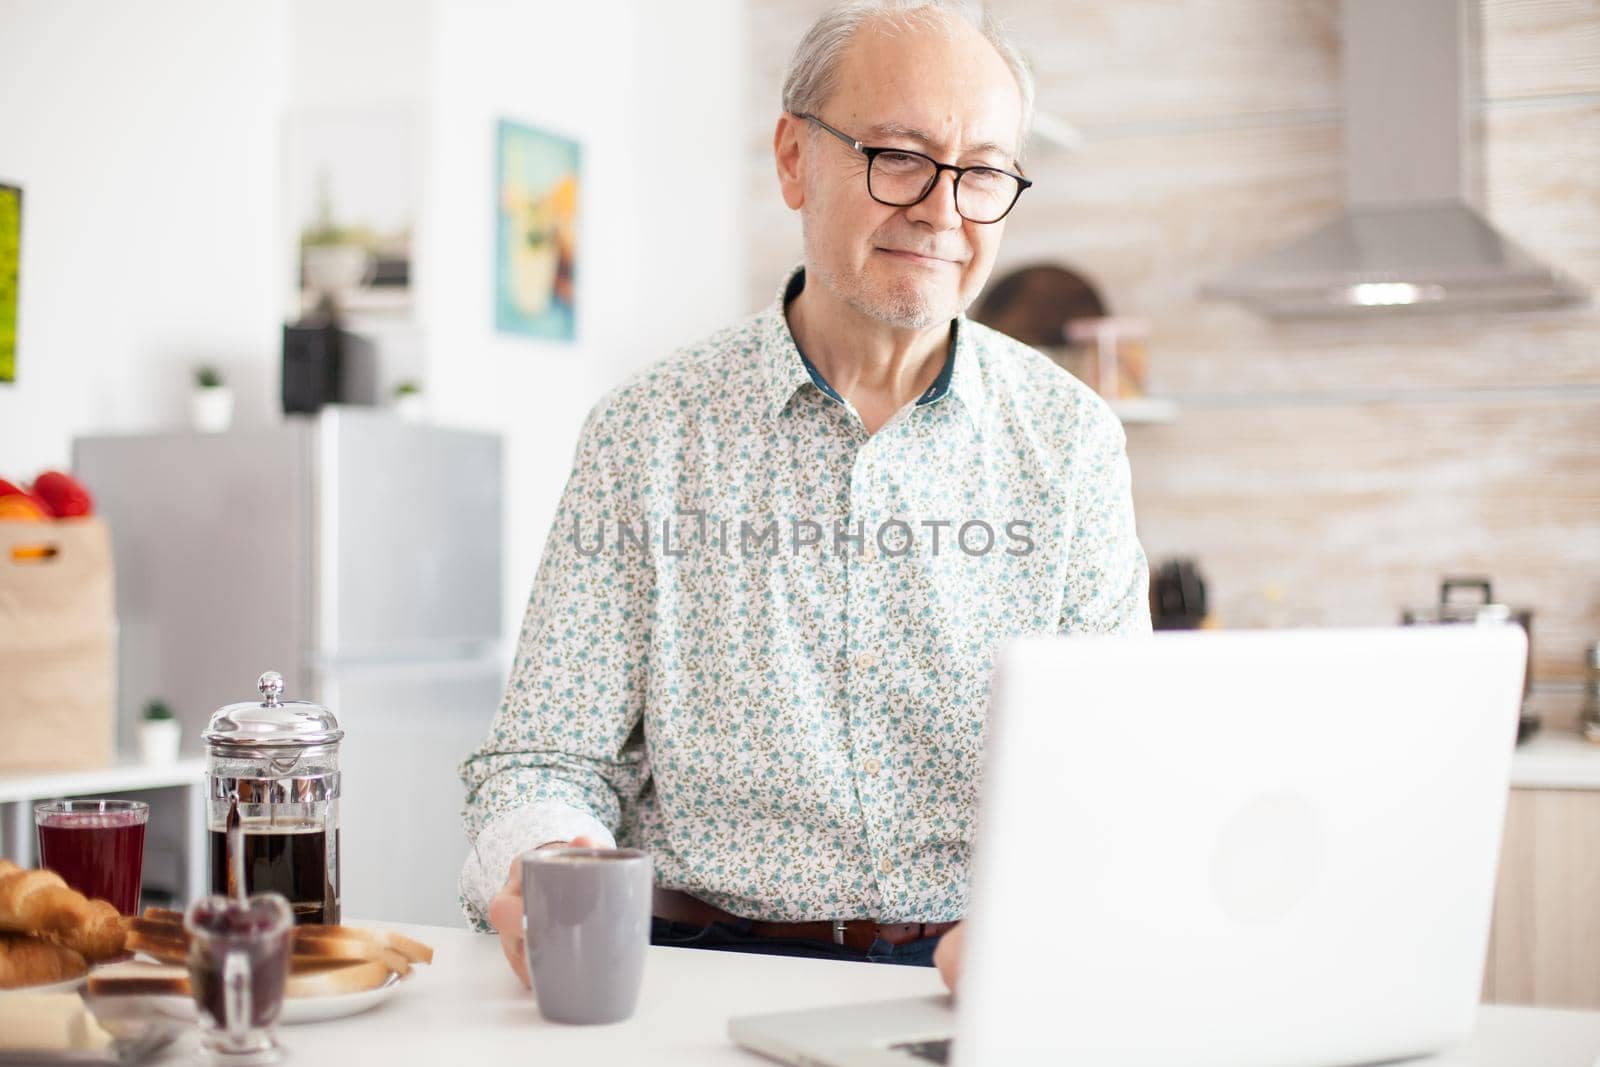 Old man in the kitchen working remotely. Daily life of senior man in kitchen during breakfast using laptop holding a cup of coffee. Elderly retired person working from home, telecommuting using remote internet job online communication on modern technology notebook